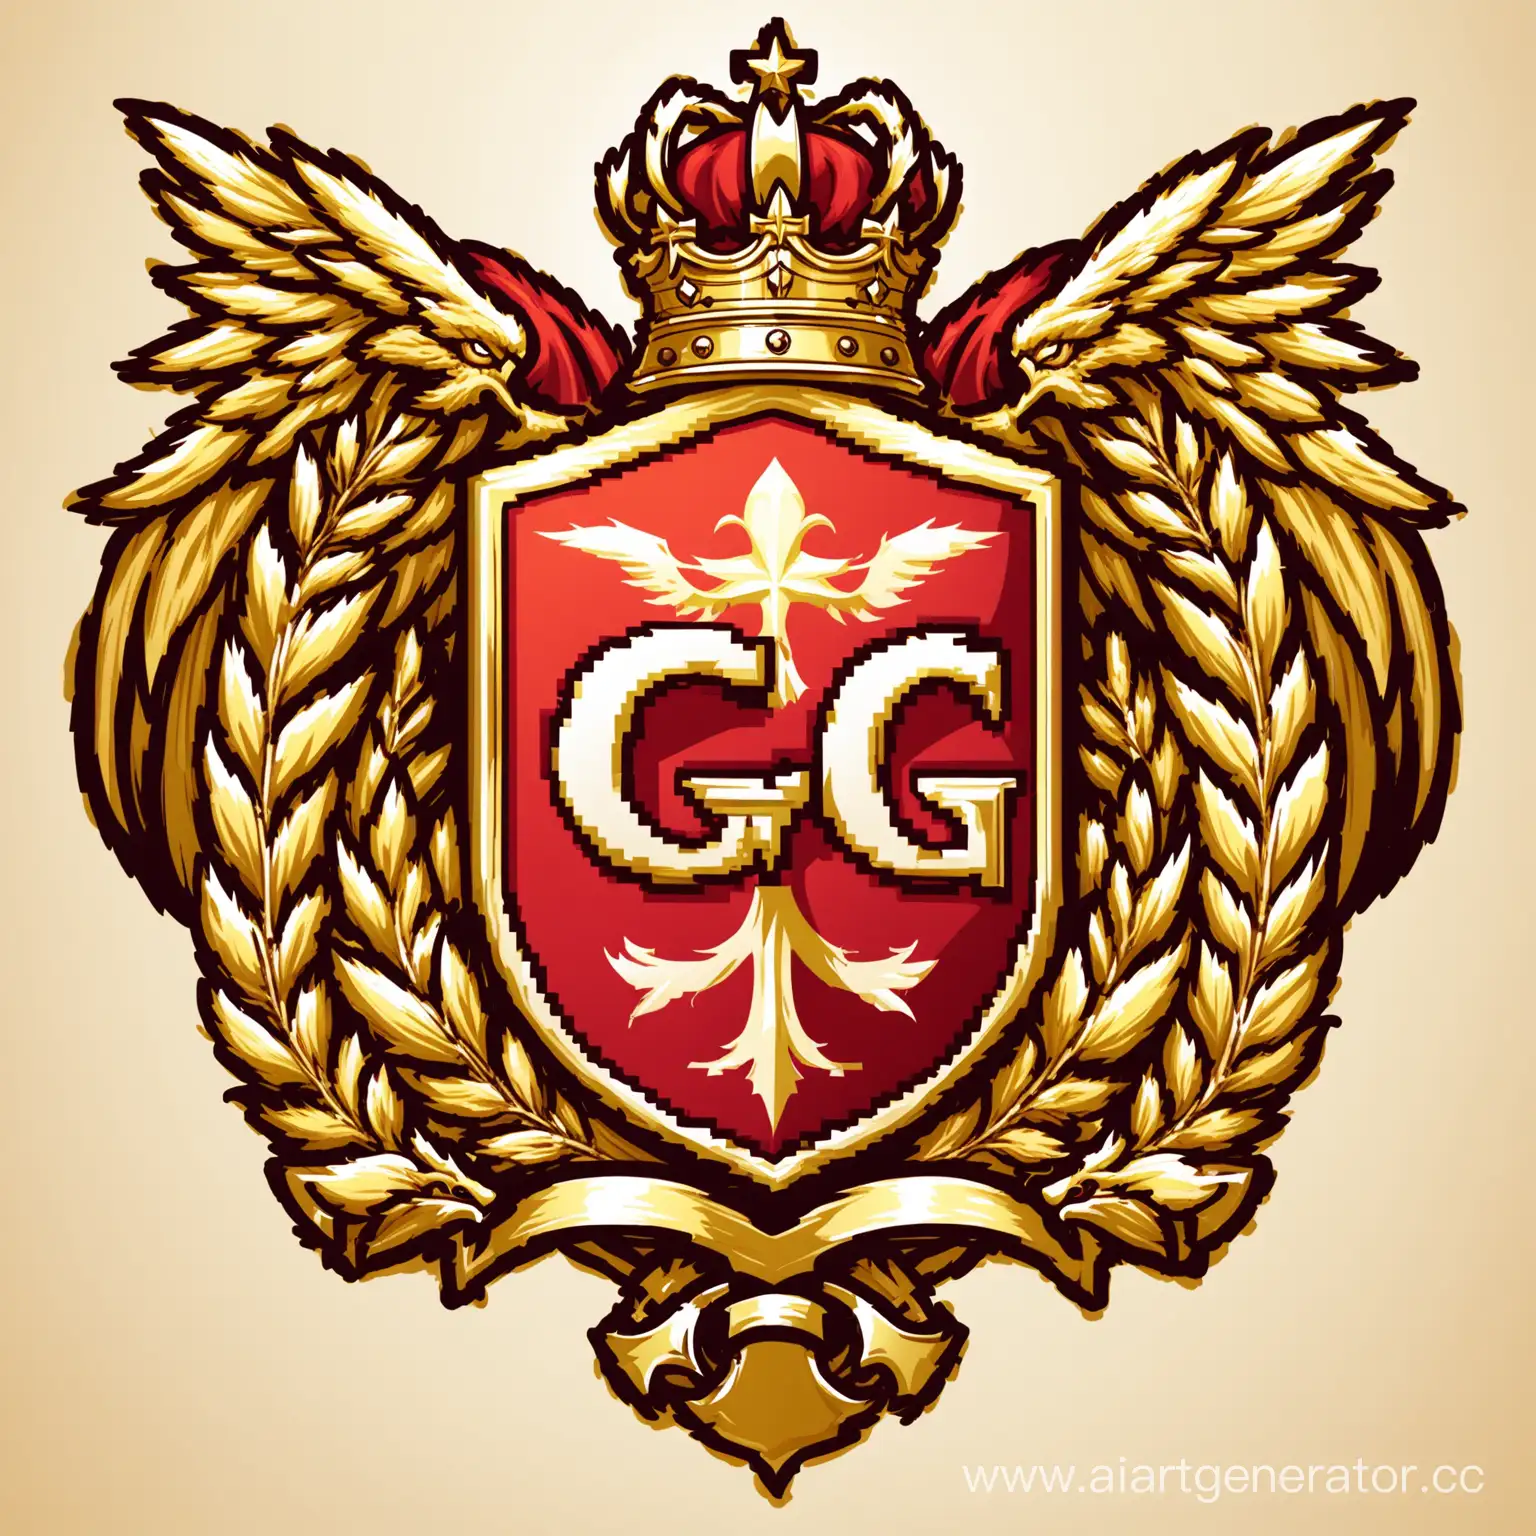 GG-Team-Coat-of-Arms-with-Regal-Lion-and-Noble-Crest